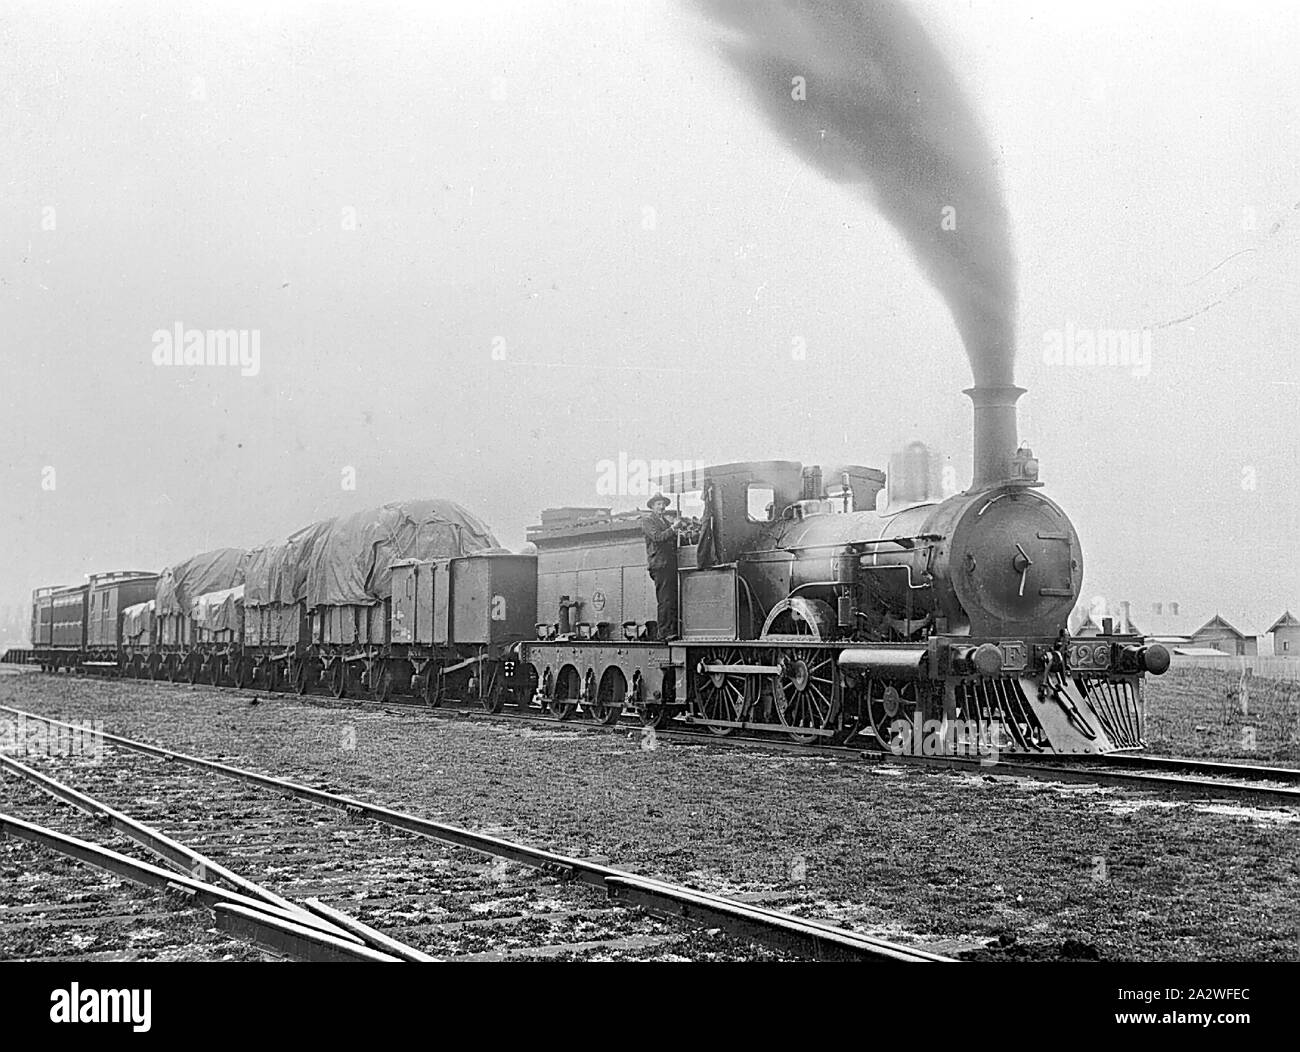 Negative - Victorian Railways F-Class 2-4-0 Steam Locomotive Hauling a Mixed Goods & Passenger Train, Waubra, Victoria, 1910, Copy of a black & white photograph depicting one of the 2-4-0 type steam passenger locomotives built by the Phoenix Foundry, of Ballarat, during the late 1870s, for use on the country branch lines or 'light lines' that were built throughout central Victoria between 1873 and 1893. The engines were built in two batches Nos.126-144 (even numbers only), which went into service in 1876-77 Stock Photo